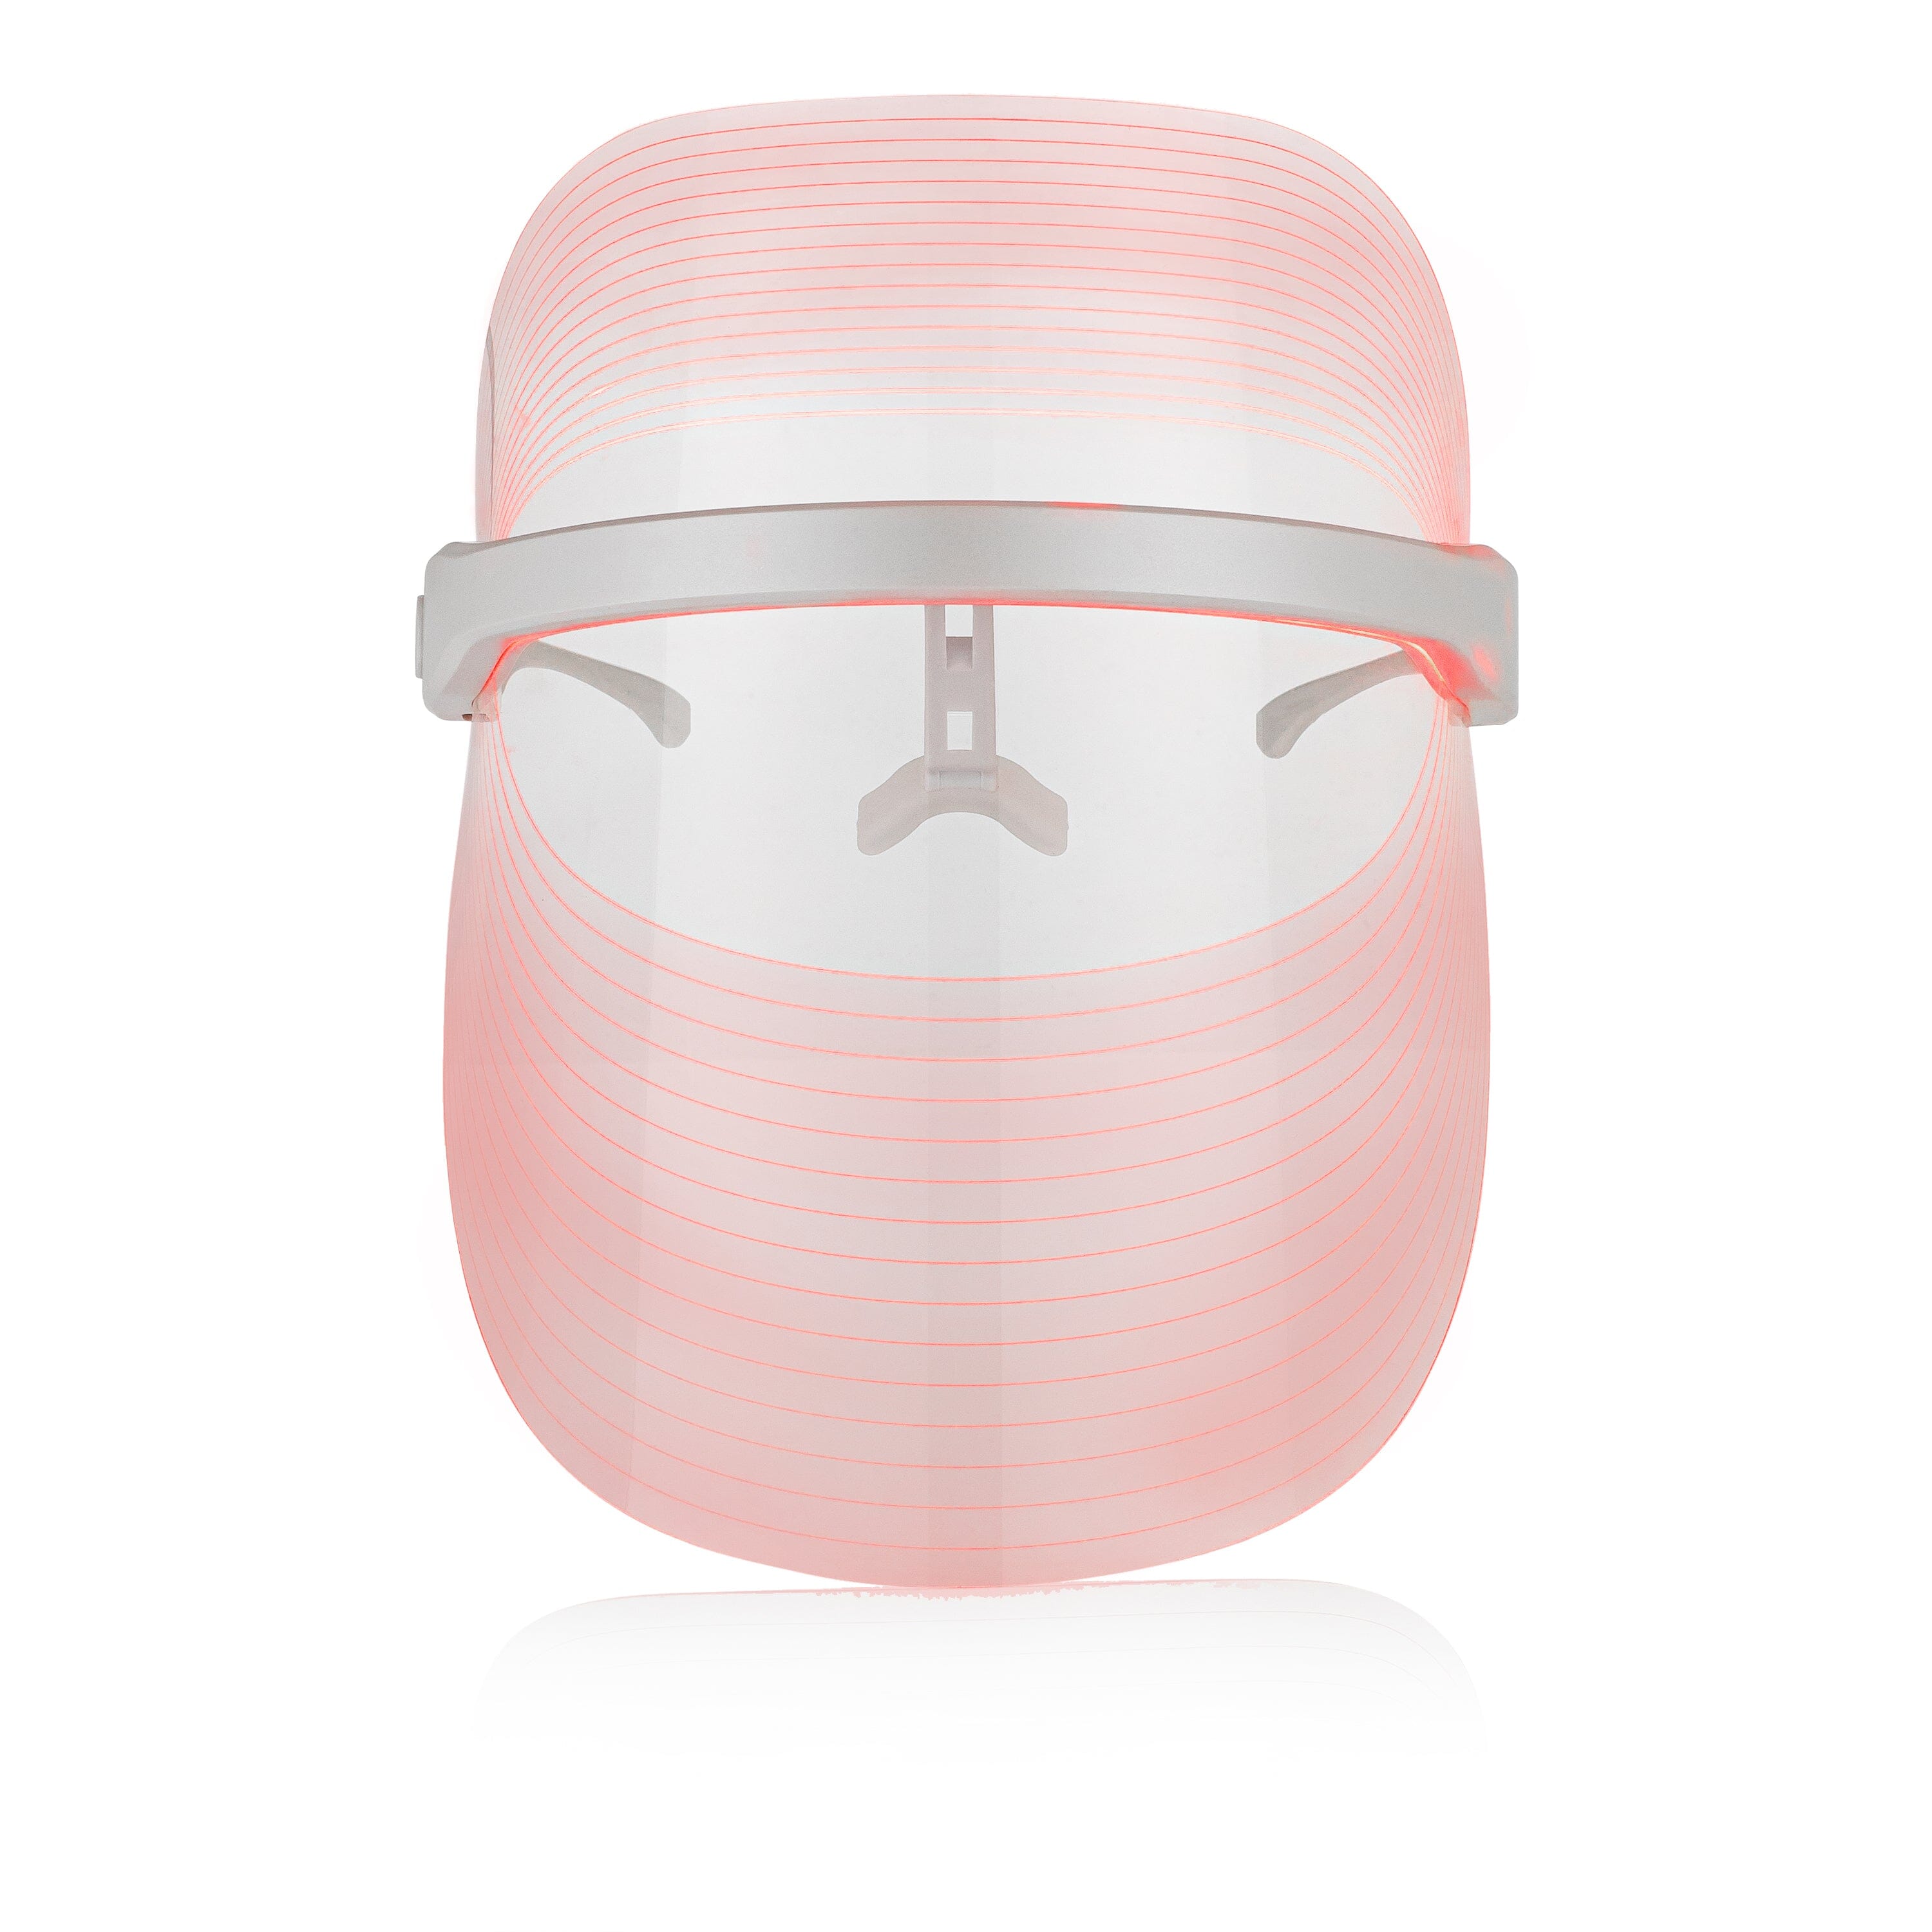 Solaris Laboratories NY How To Glow 4 Color LED Light Therapy Mask Solaris Laboratories NY Shop at Exclusive Beauty Club